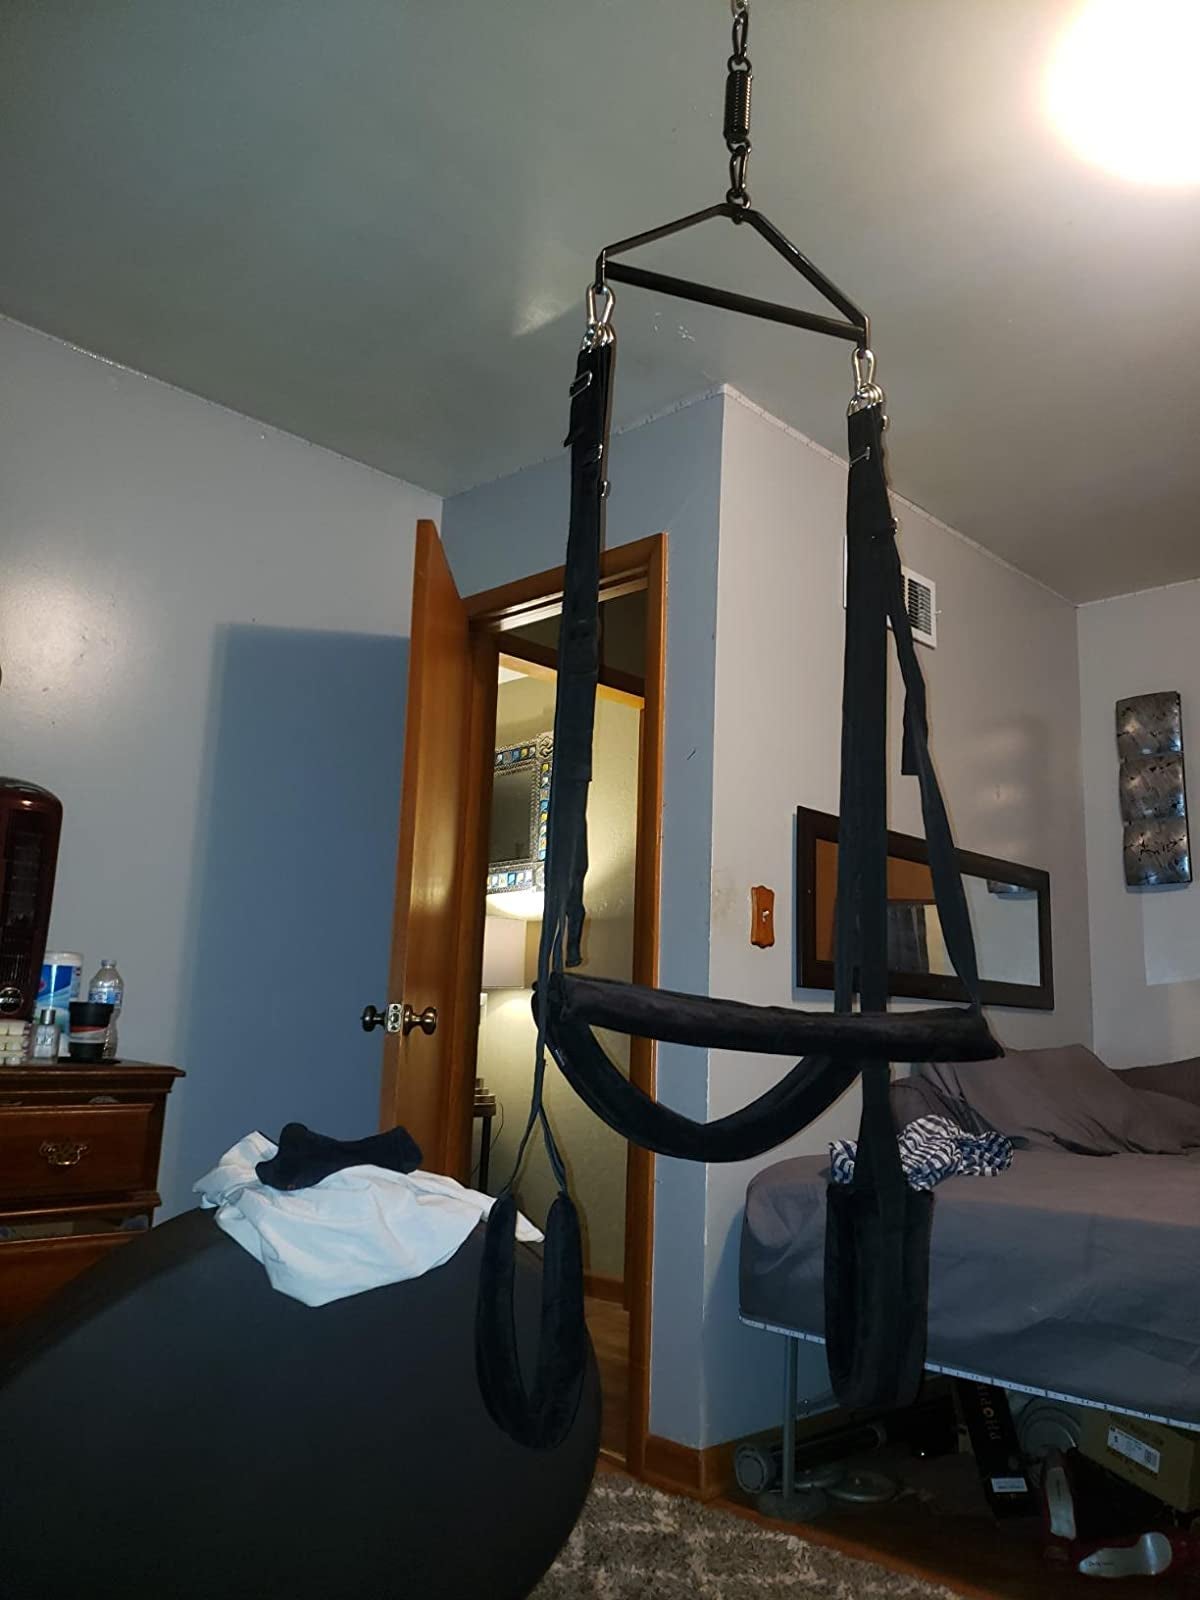 Black sex swing hanging from bedroom ceiling